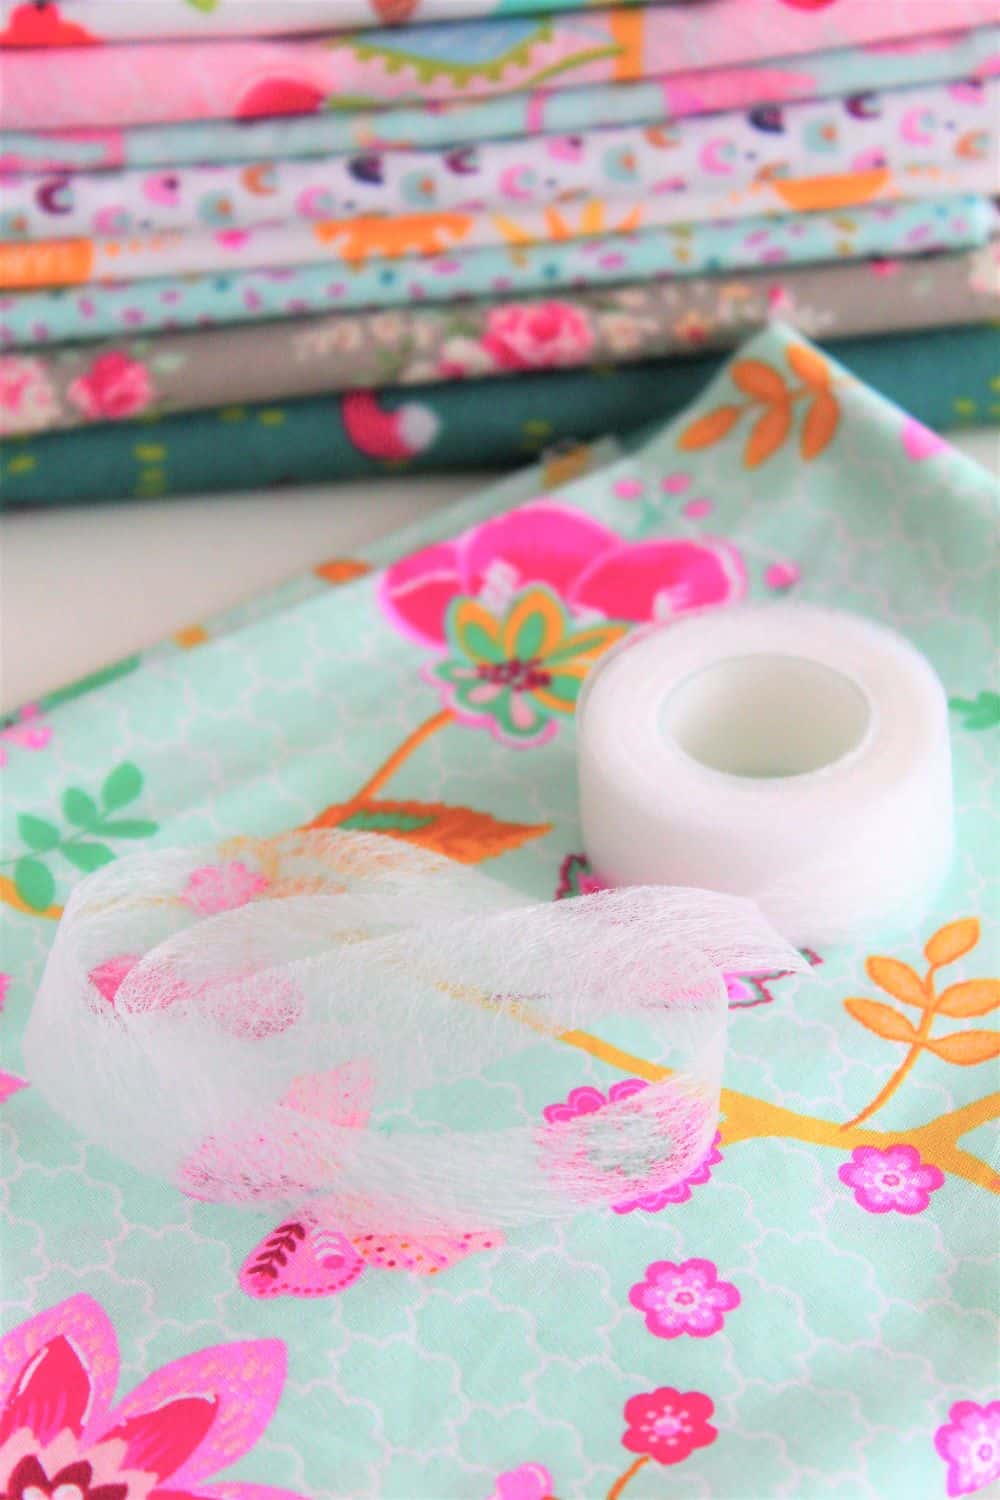 What Is HEMMING TAPE & What Does It Do? - Easy Peasy Creative Ideas